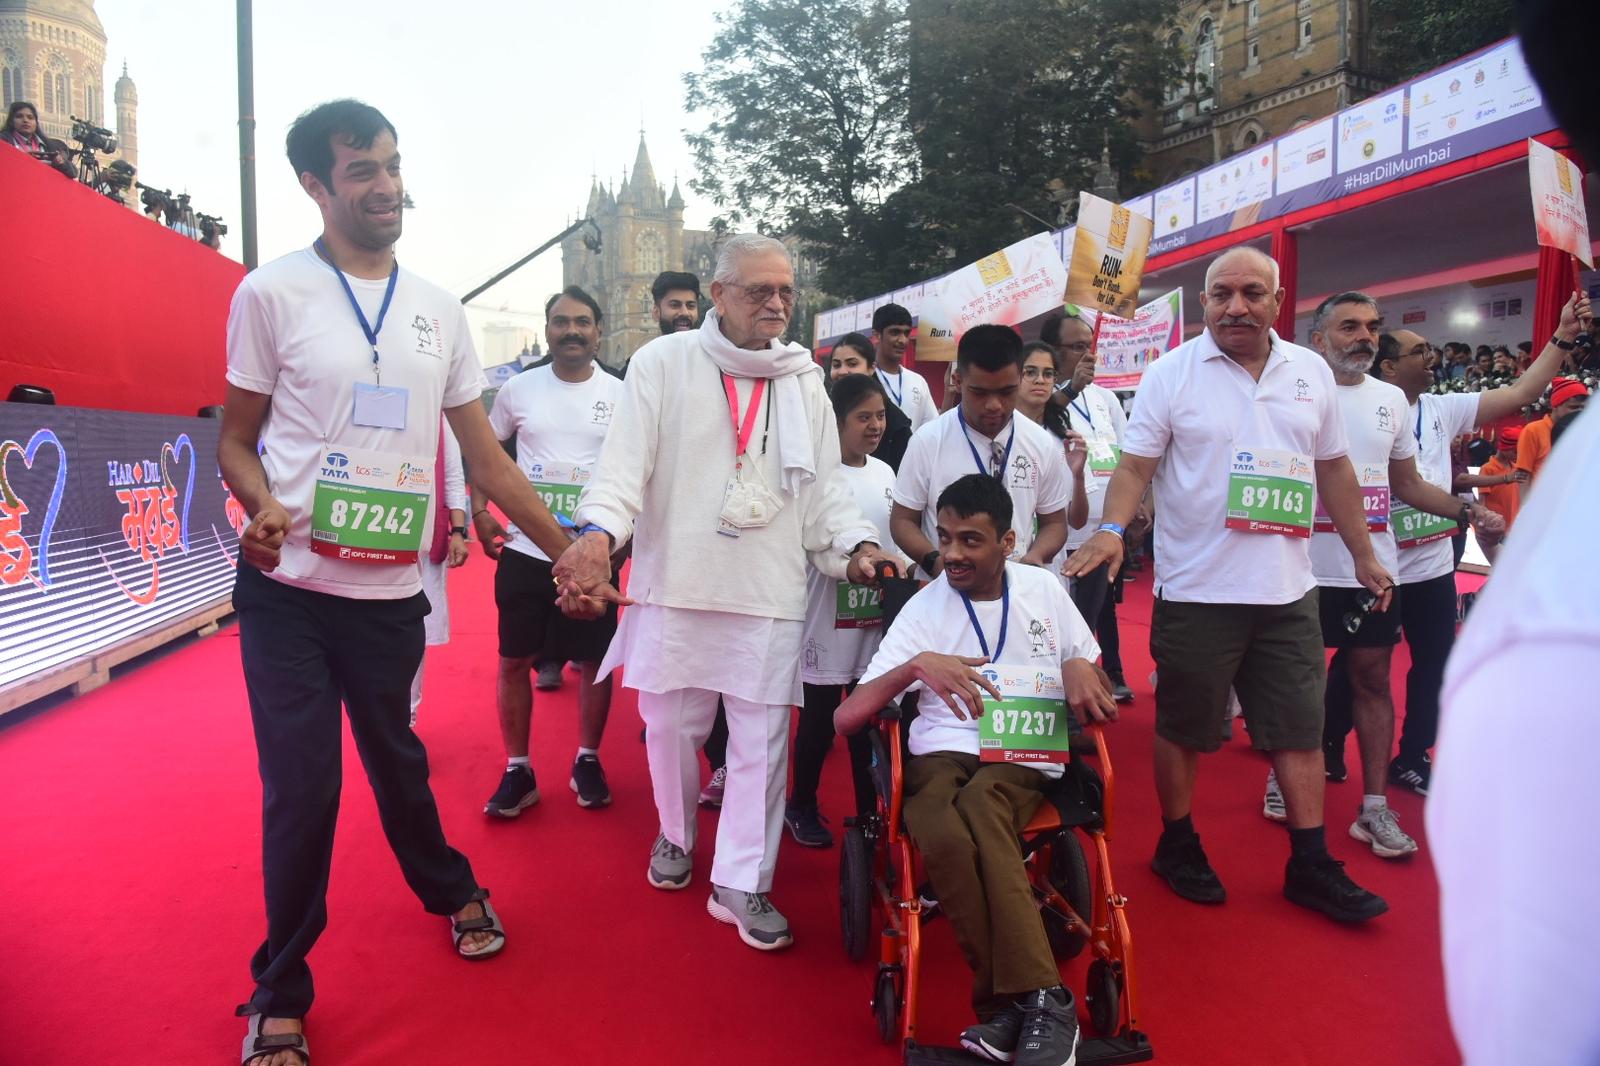 The Mumbai Marathon is amongst the top 10 marathons in the world. It will be held in six different race categories: full marathon (42.195 kms), half marathon (21.097 kms), dream run (6.6 km), senior citizens race (4.7 km), champions with disability category (2.1 km) and the open 10 km run